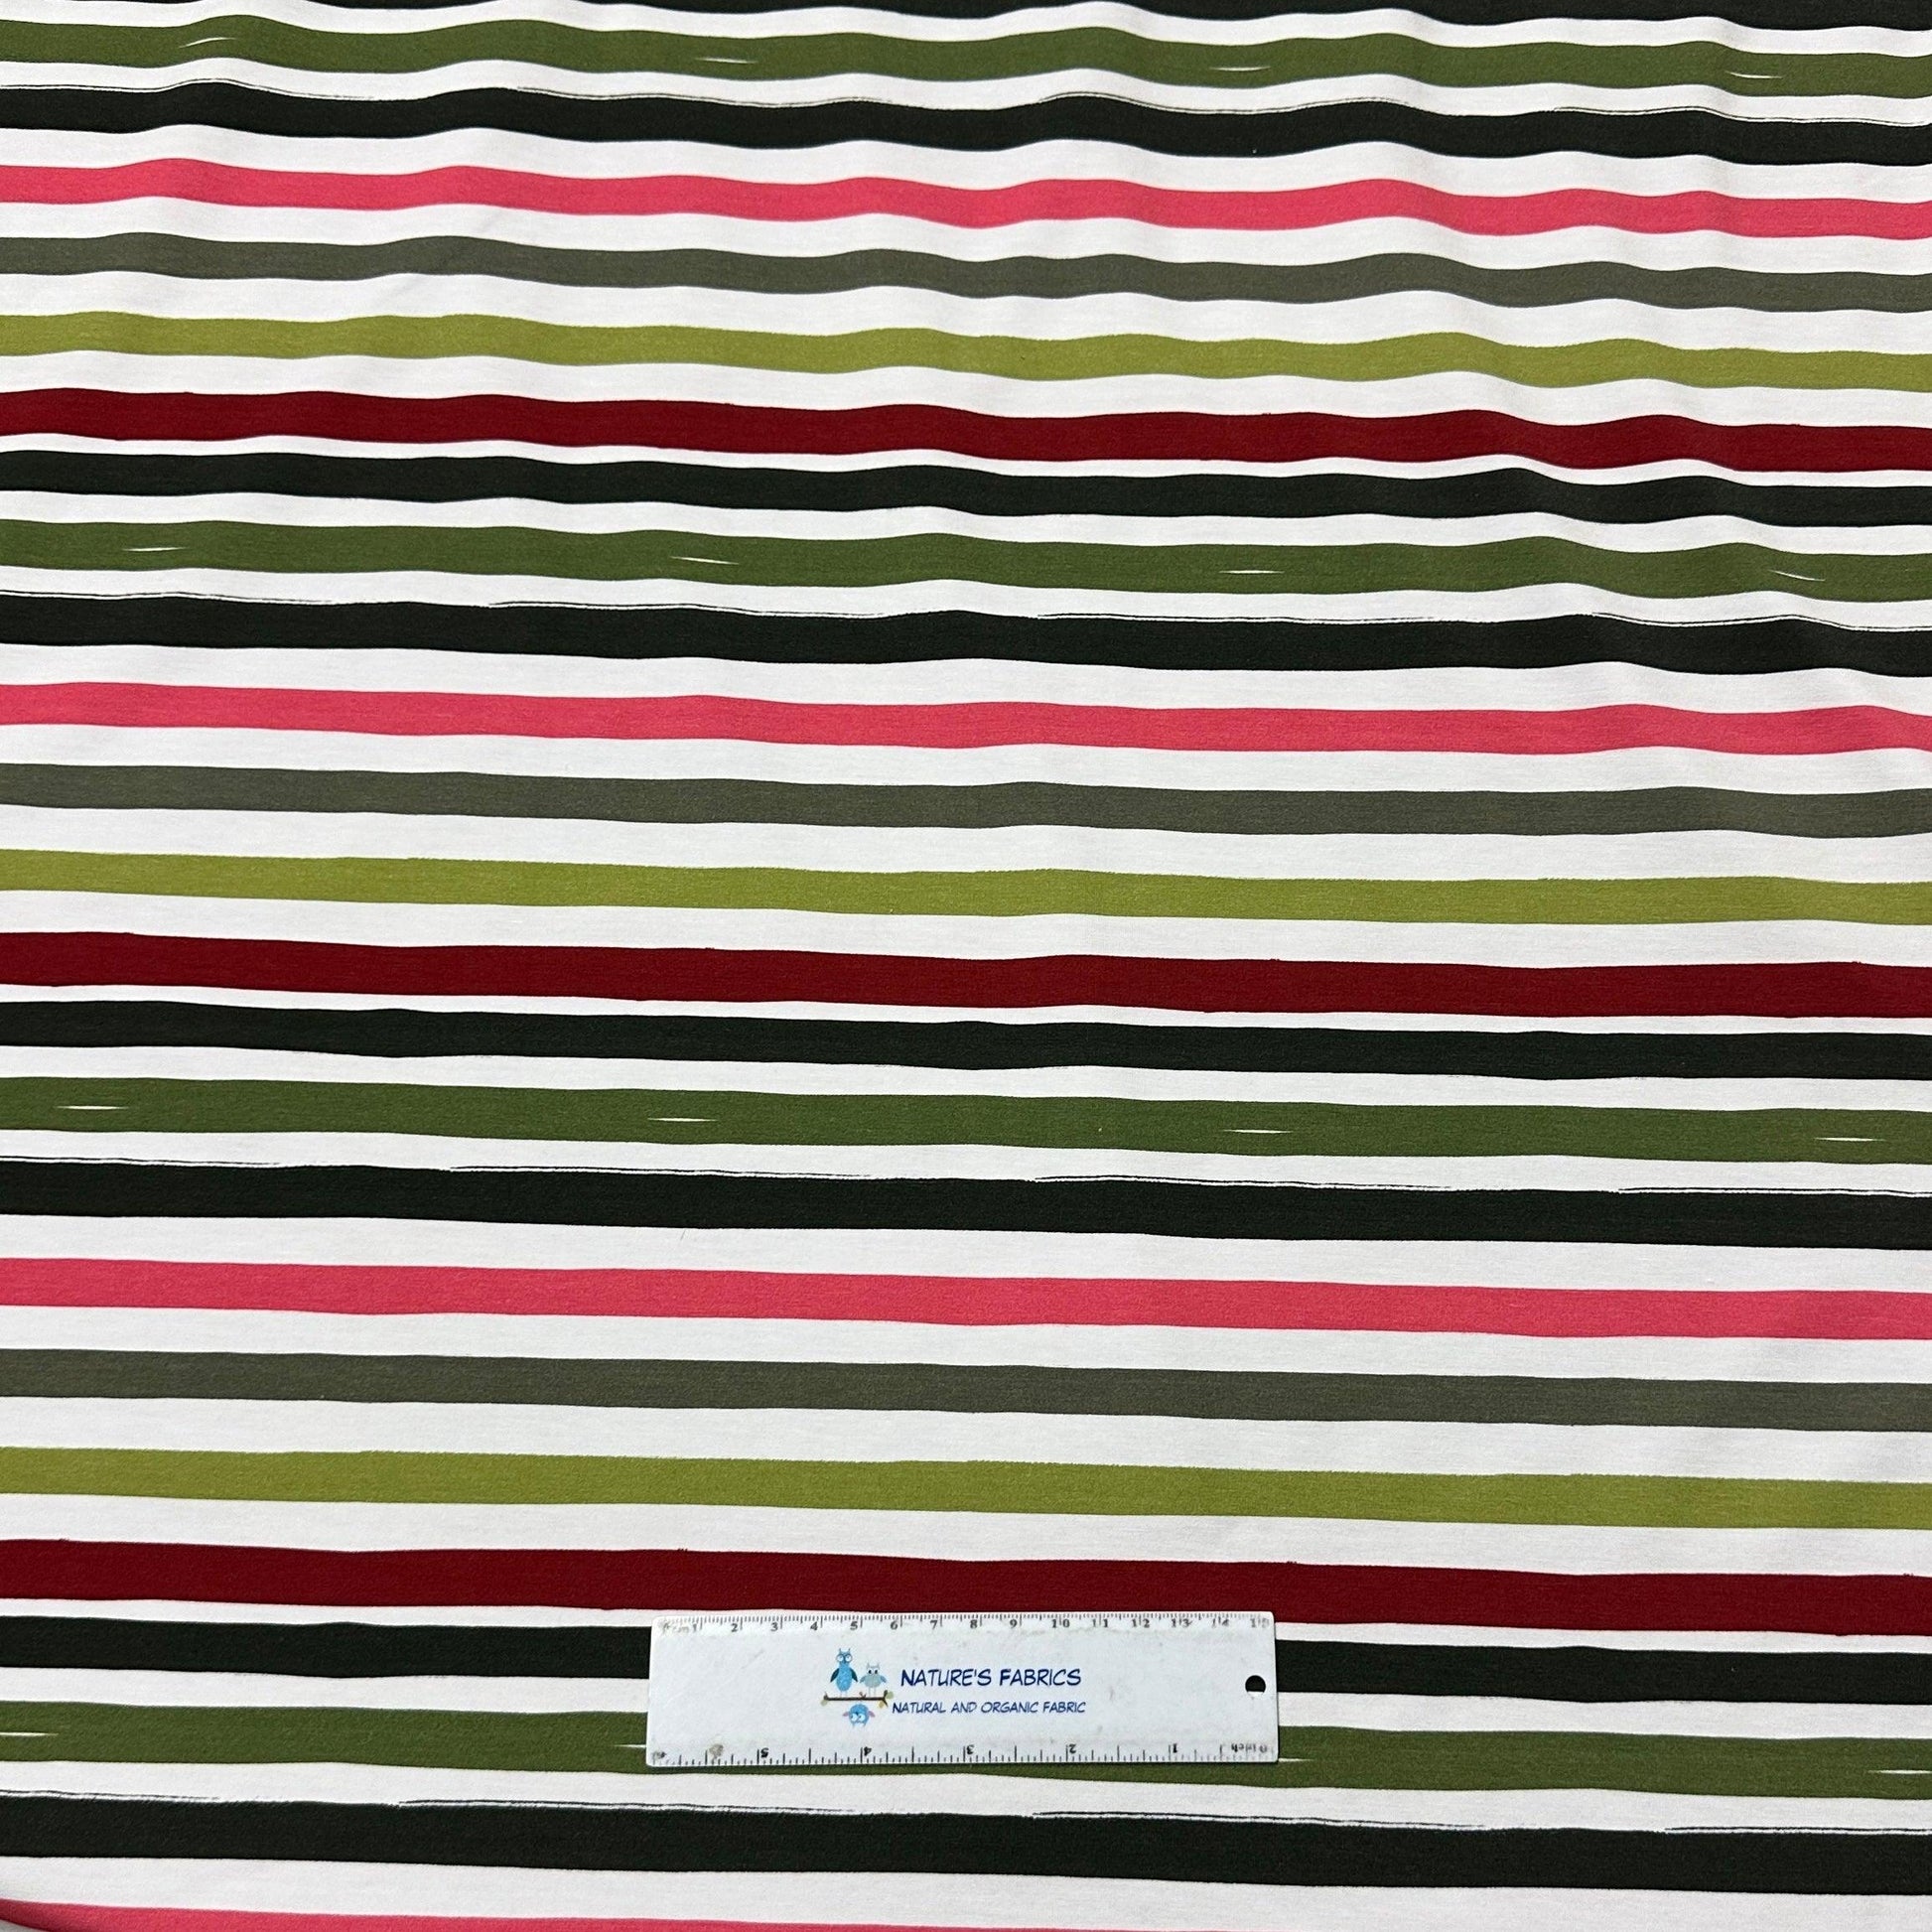 Colorful Stripes on Bamboo/Spandex Jersey Fabric - Nature's Fabrics